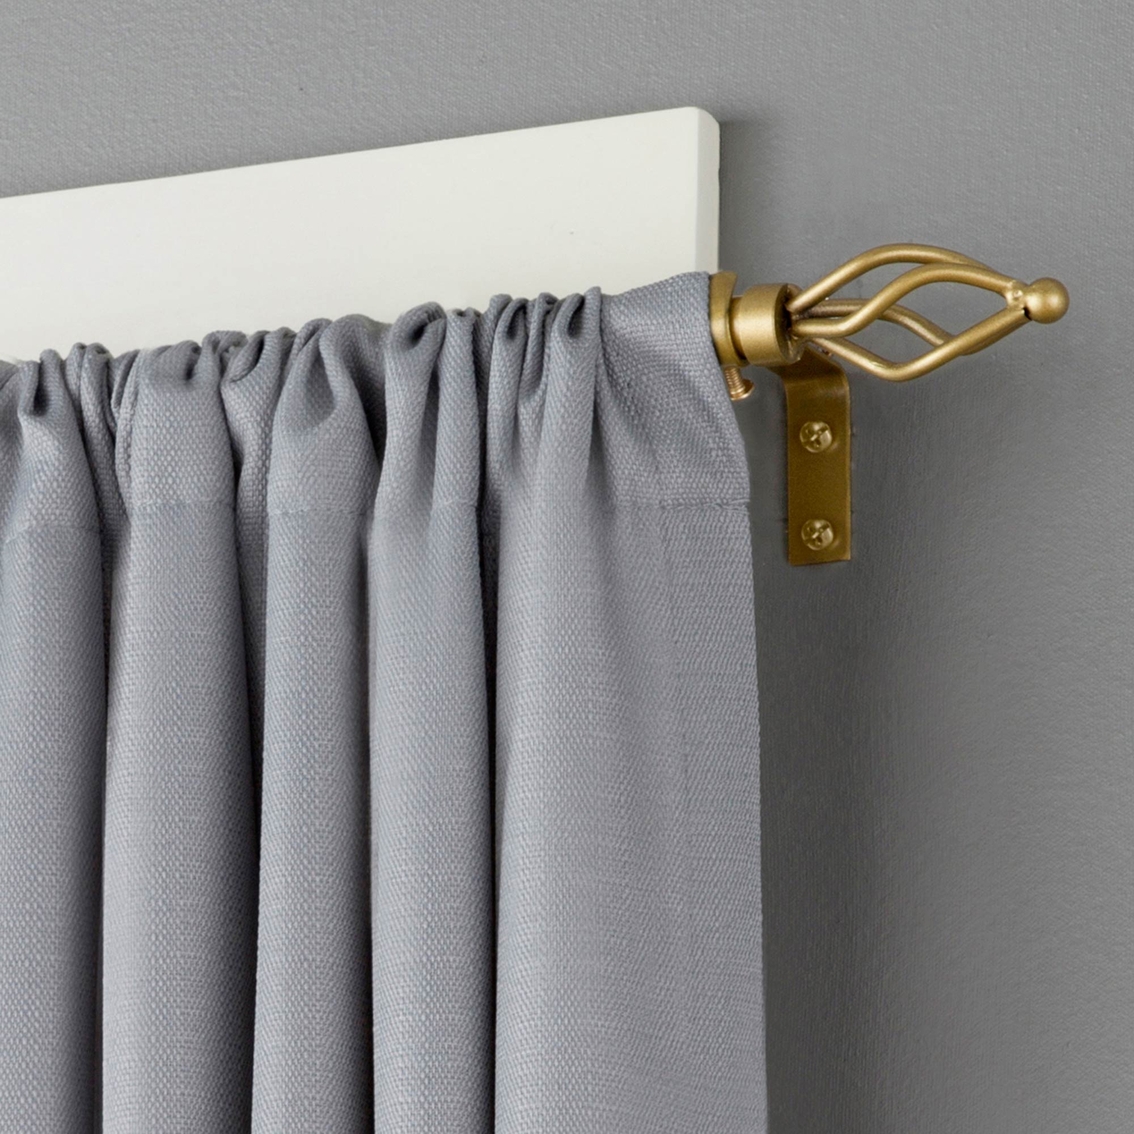 Kenney Birdcage 48 to 86 in. Curtain Rod - Image 4 of 4